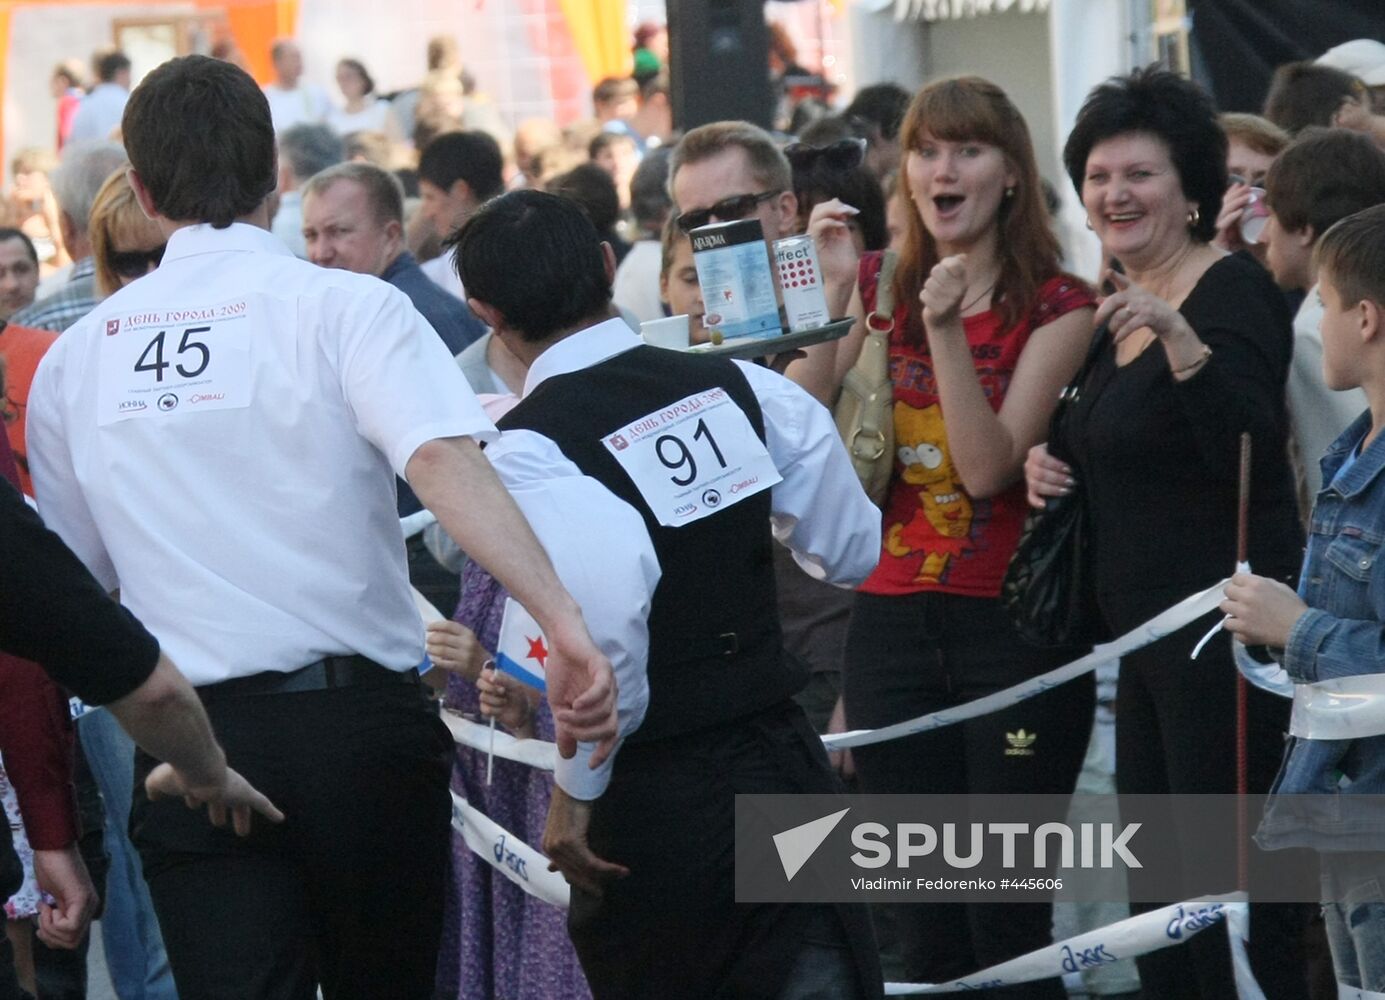 Waiters race with trays